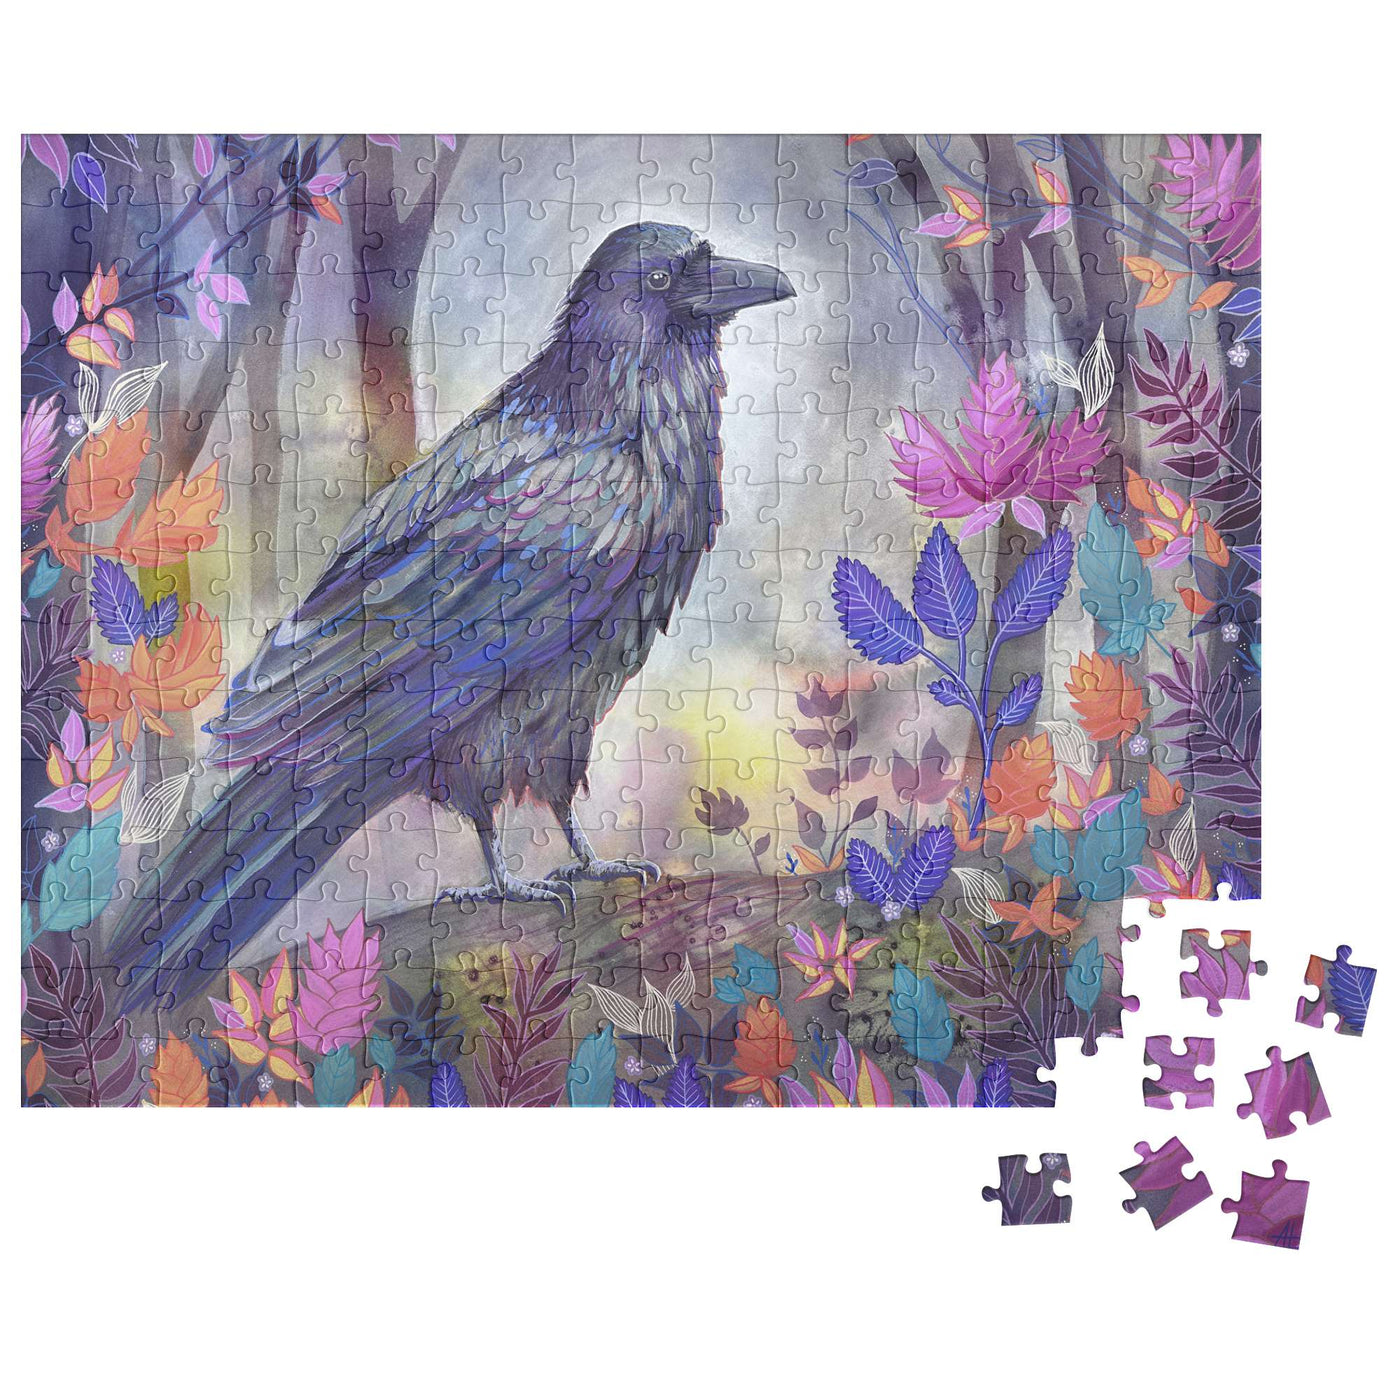 A Raven Puzzle of a raven standing in a colorful floral forest, with several puzzle pieces detached from the main puzzle.